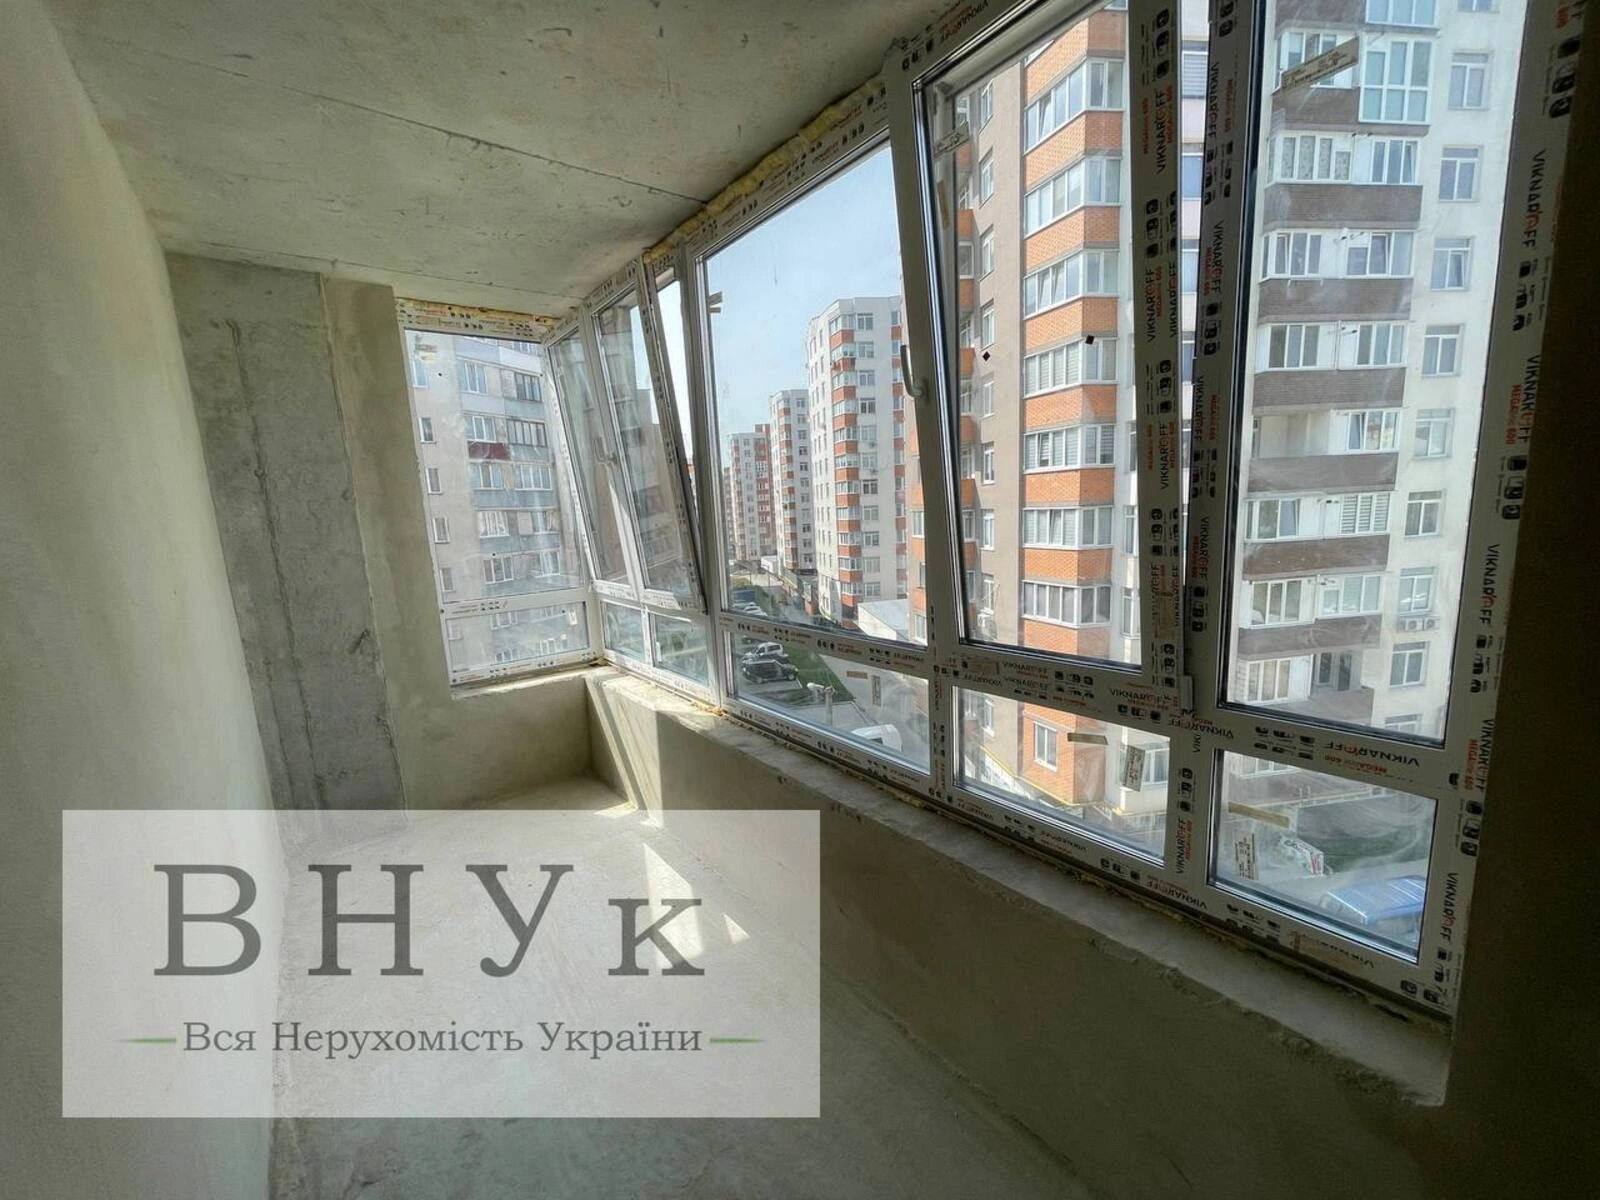 Apartments for sale. 1 room, 39 m², 5th floor/6 floors. Smakuly vul., Ternopil. 